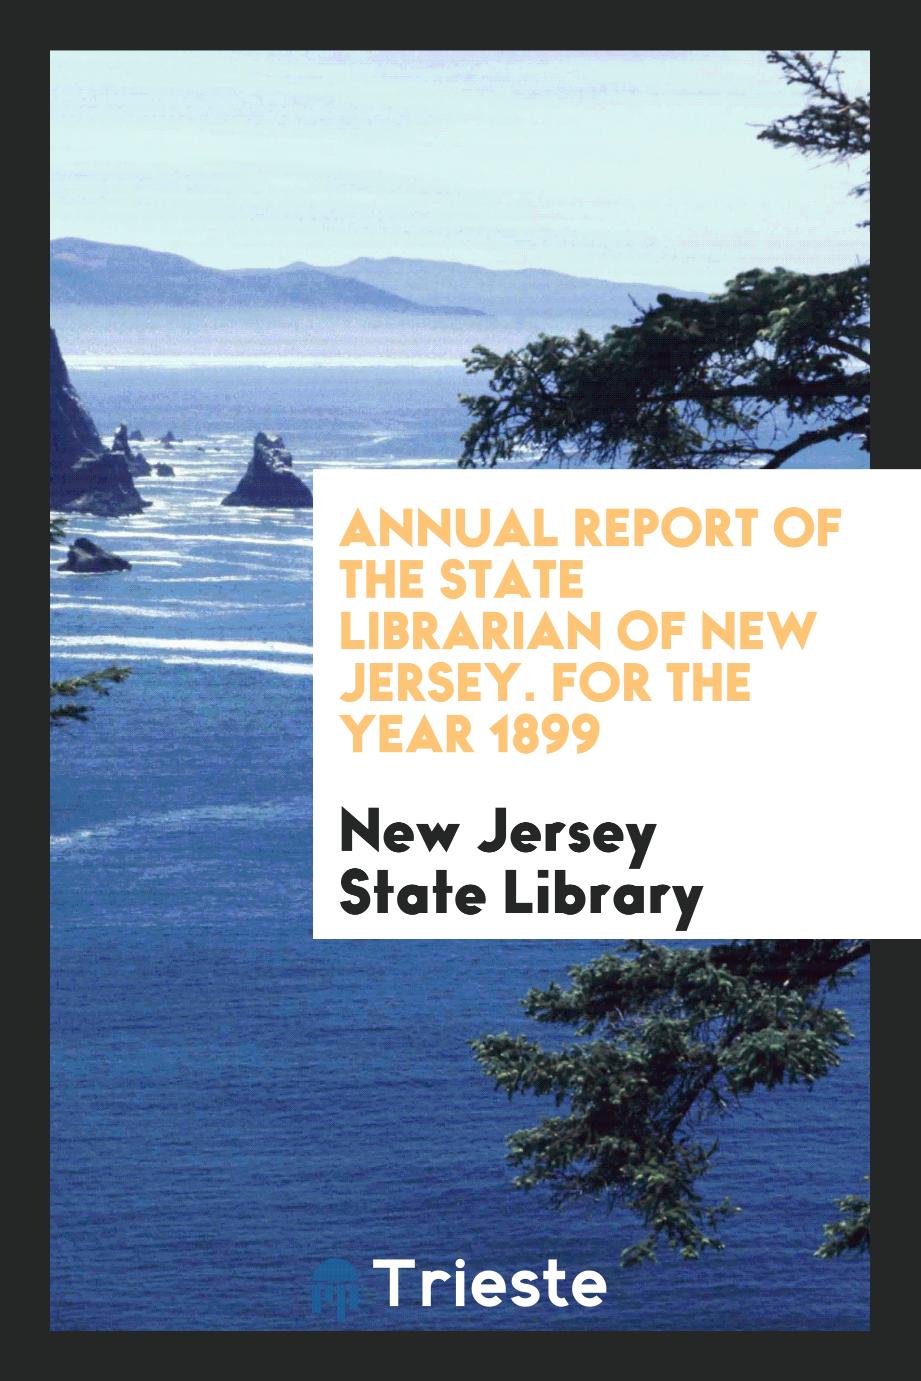 Annual Report of the State Librarian of New Jersey. For the year 1899